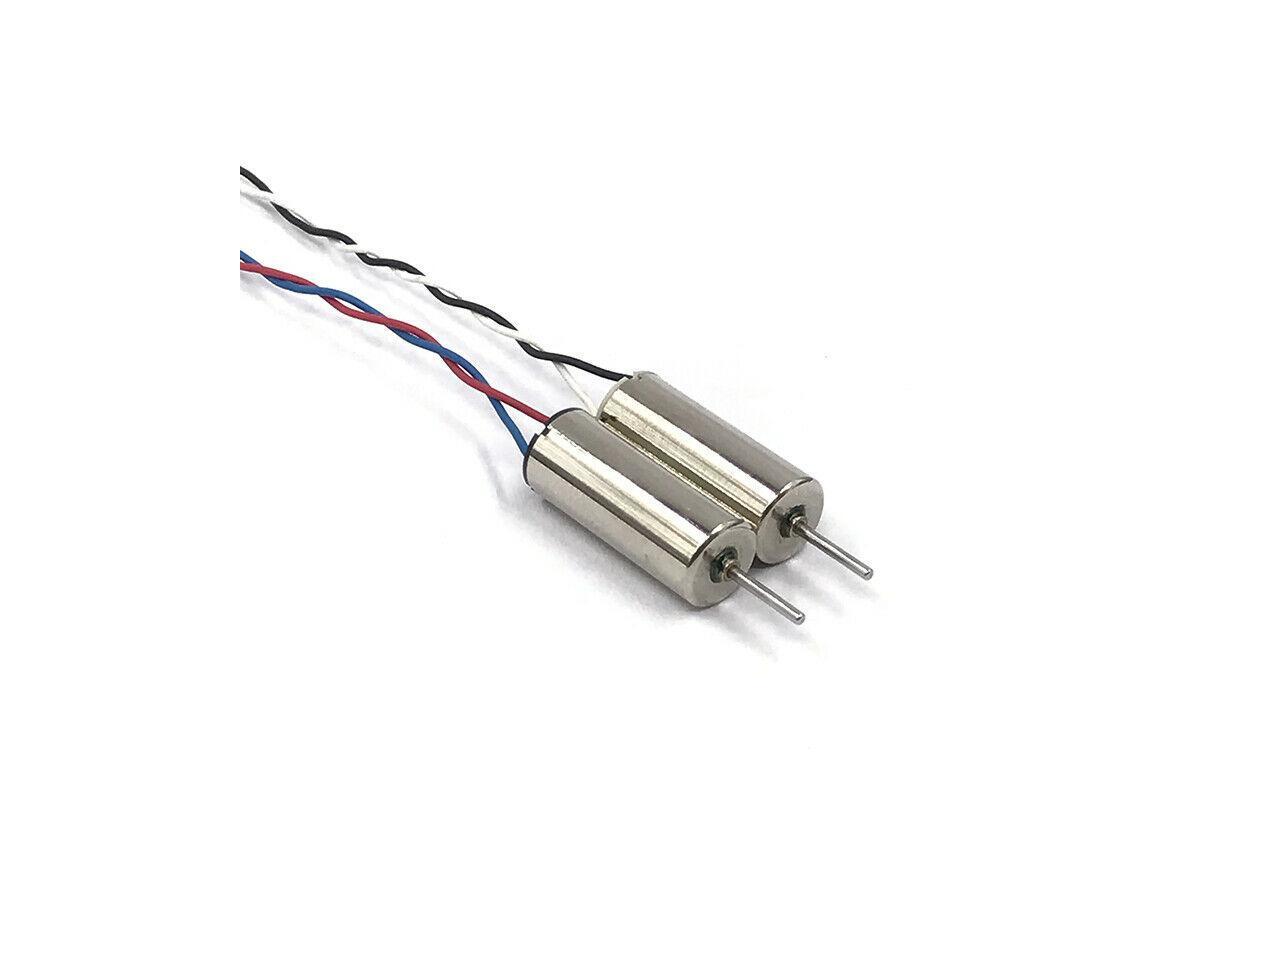 4PCS DC 7.4V Mini 8520 High Speed Coreless Motor NdFeB Magnetic for RC Drone Toy 